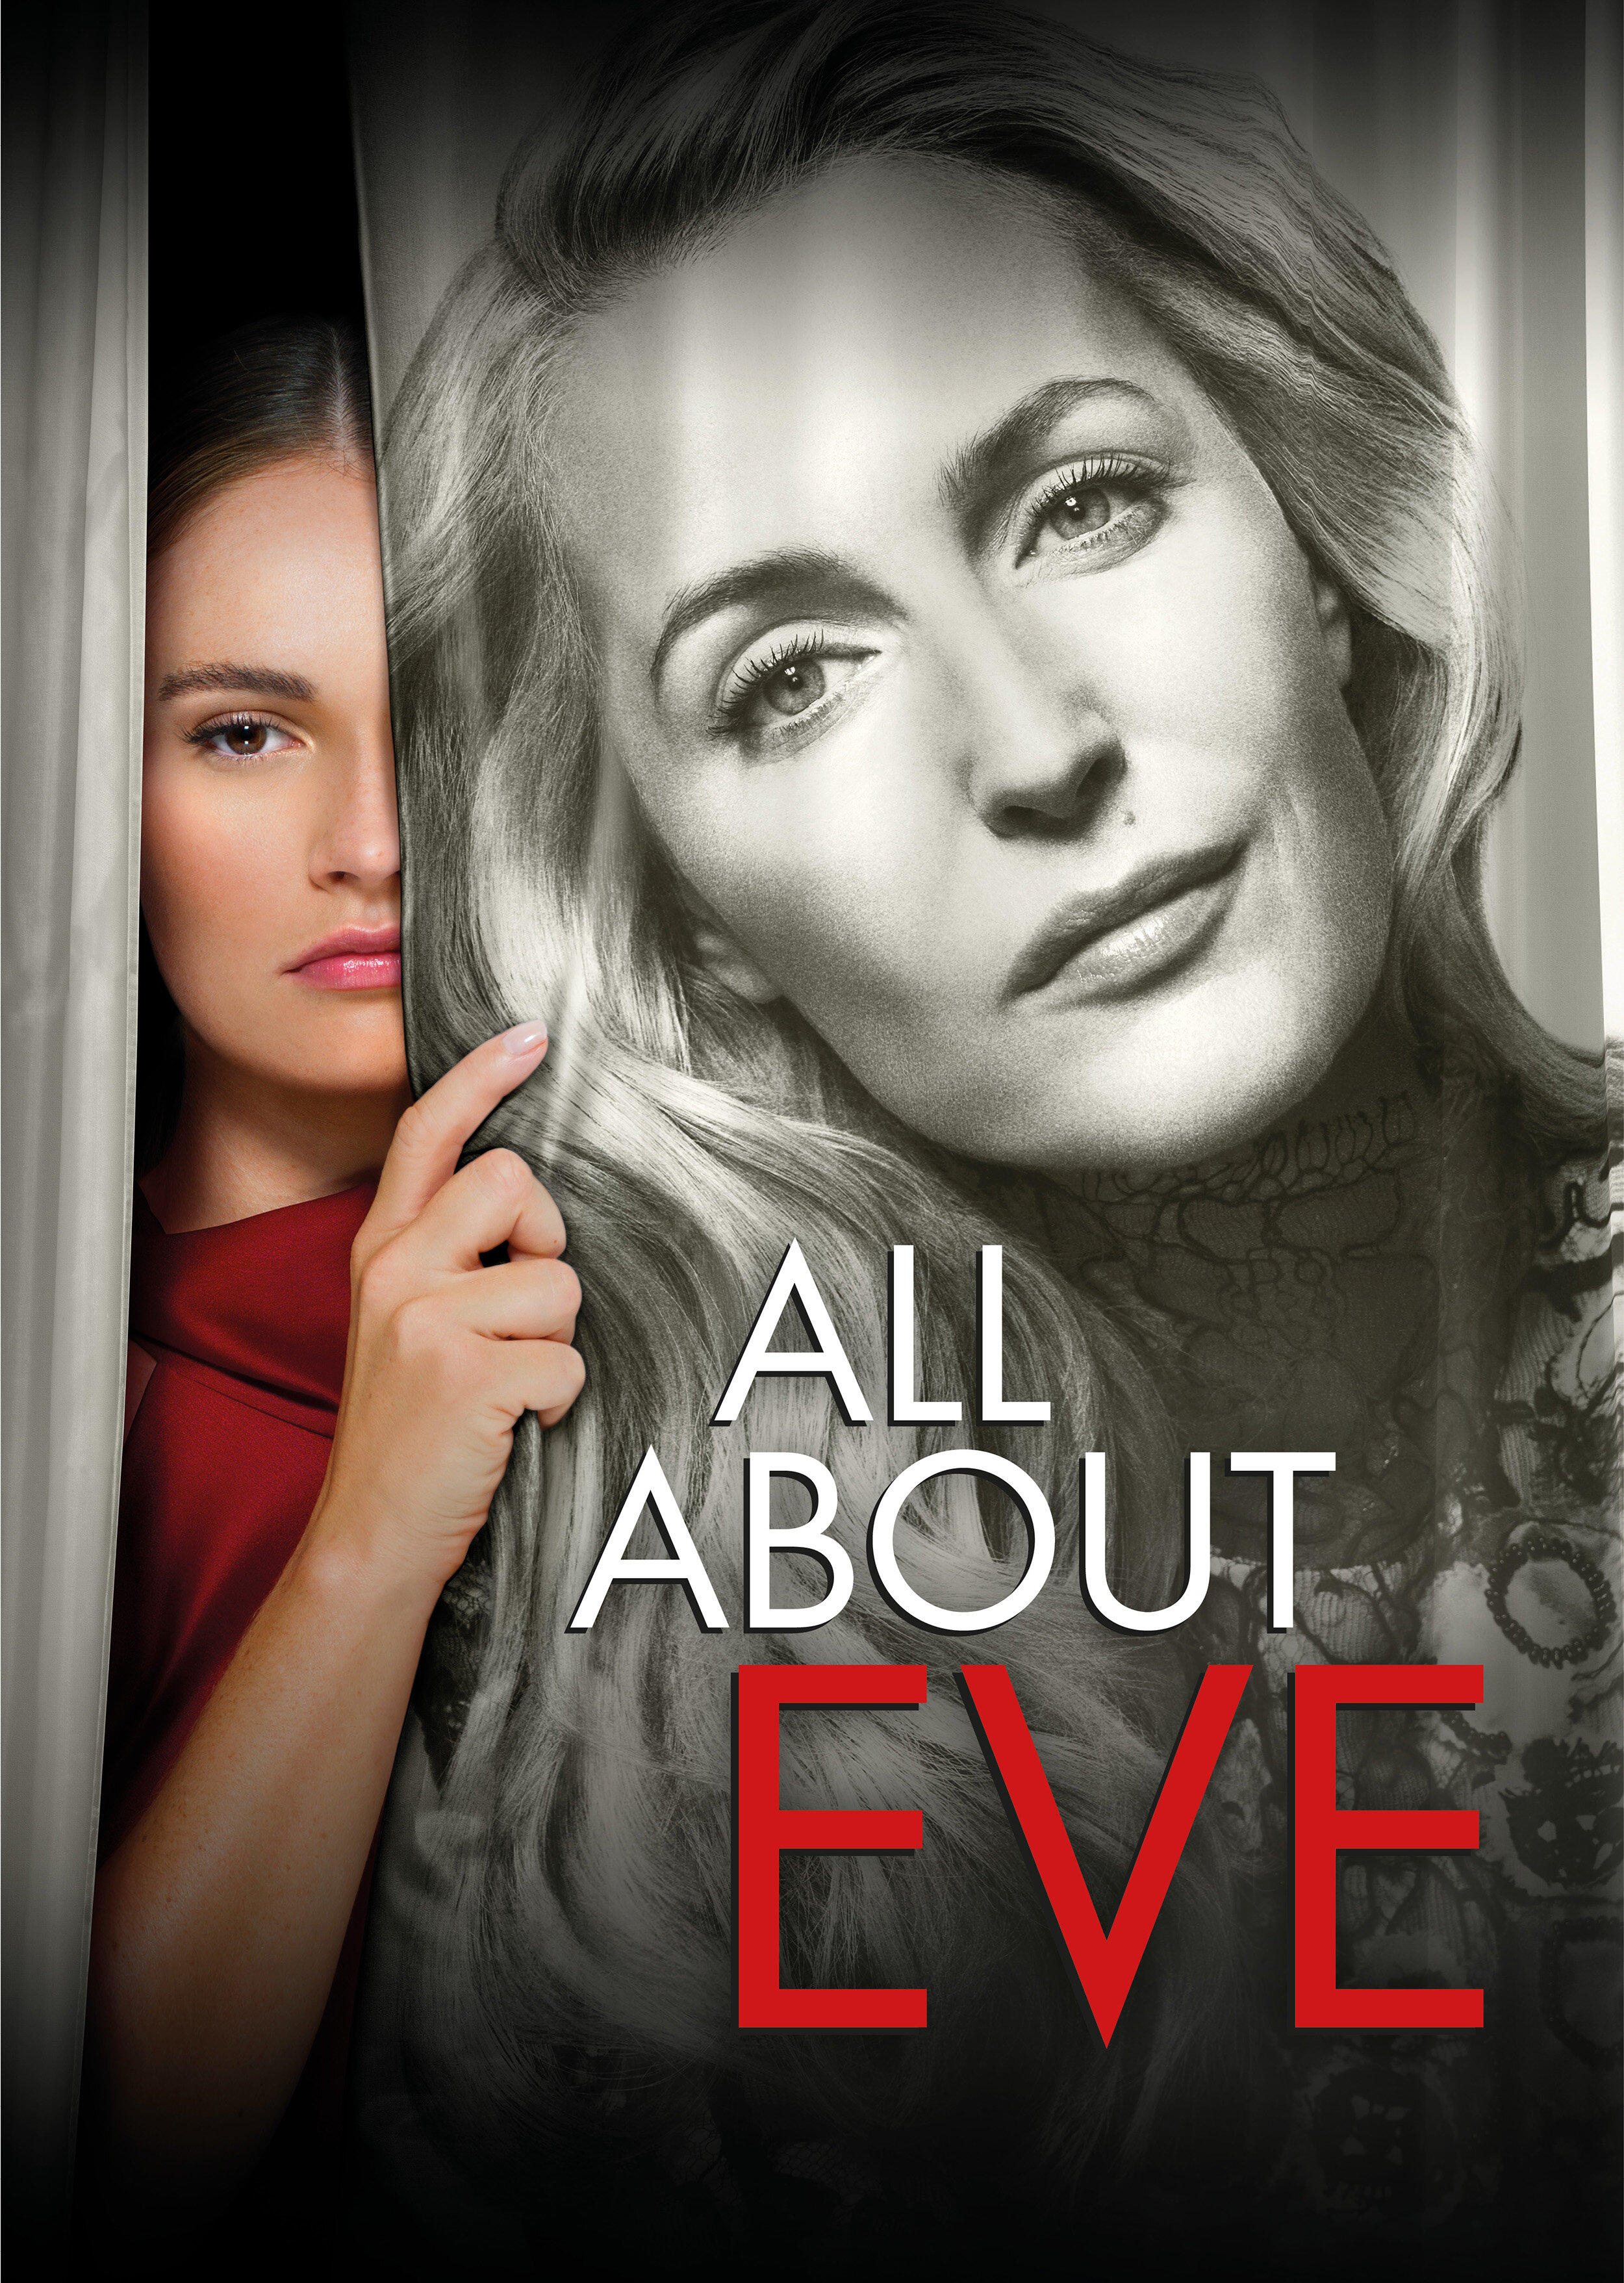 All About Eve A33.jpg